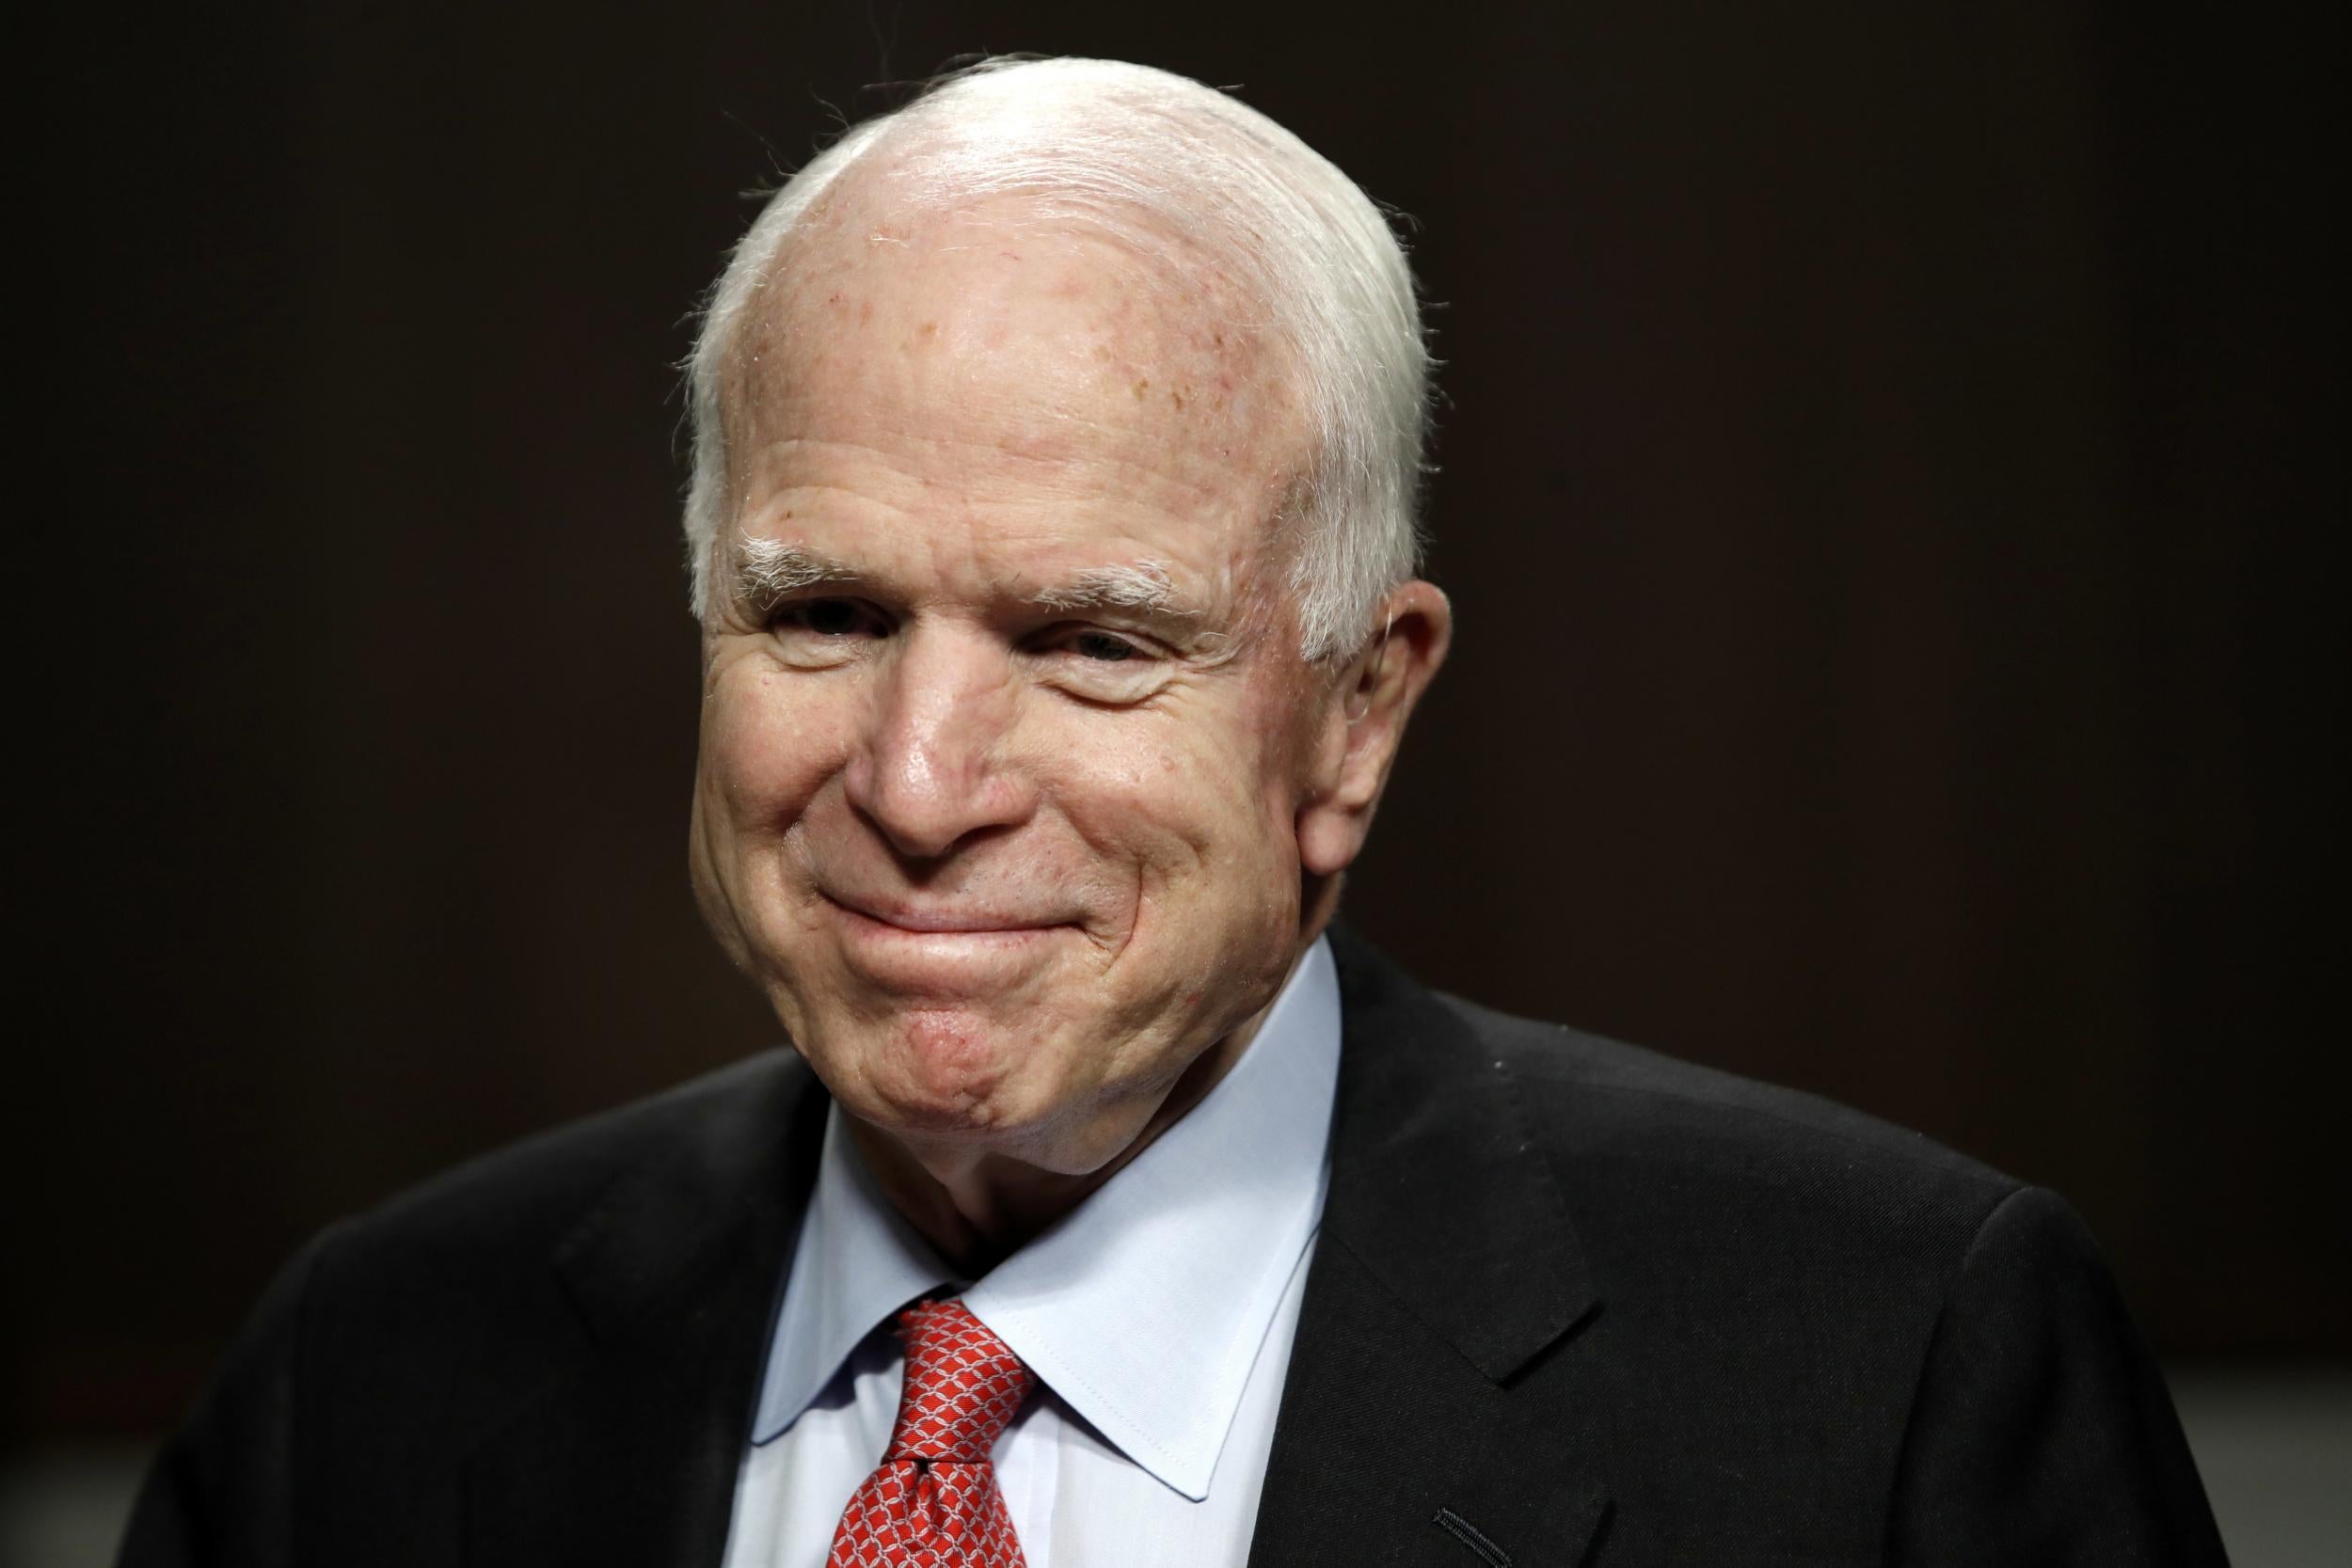 John McCain speaks out for first time since brain cancer diagnosis with